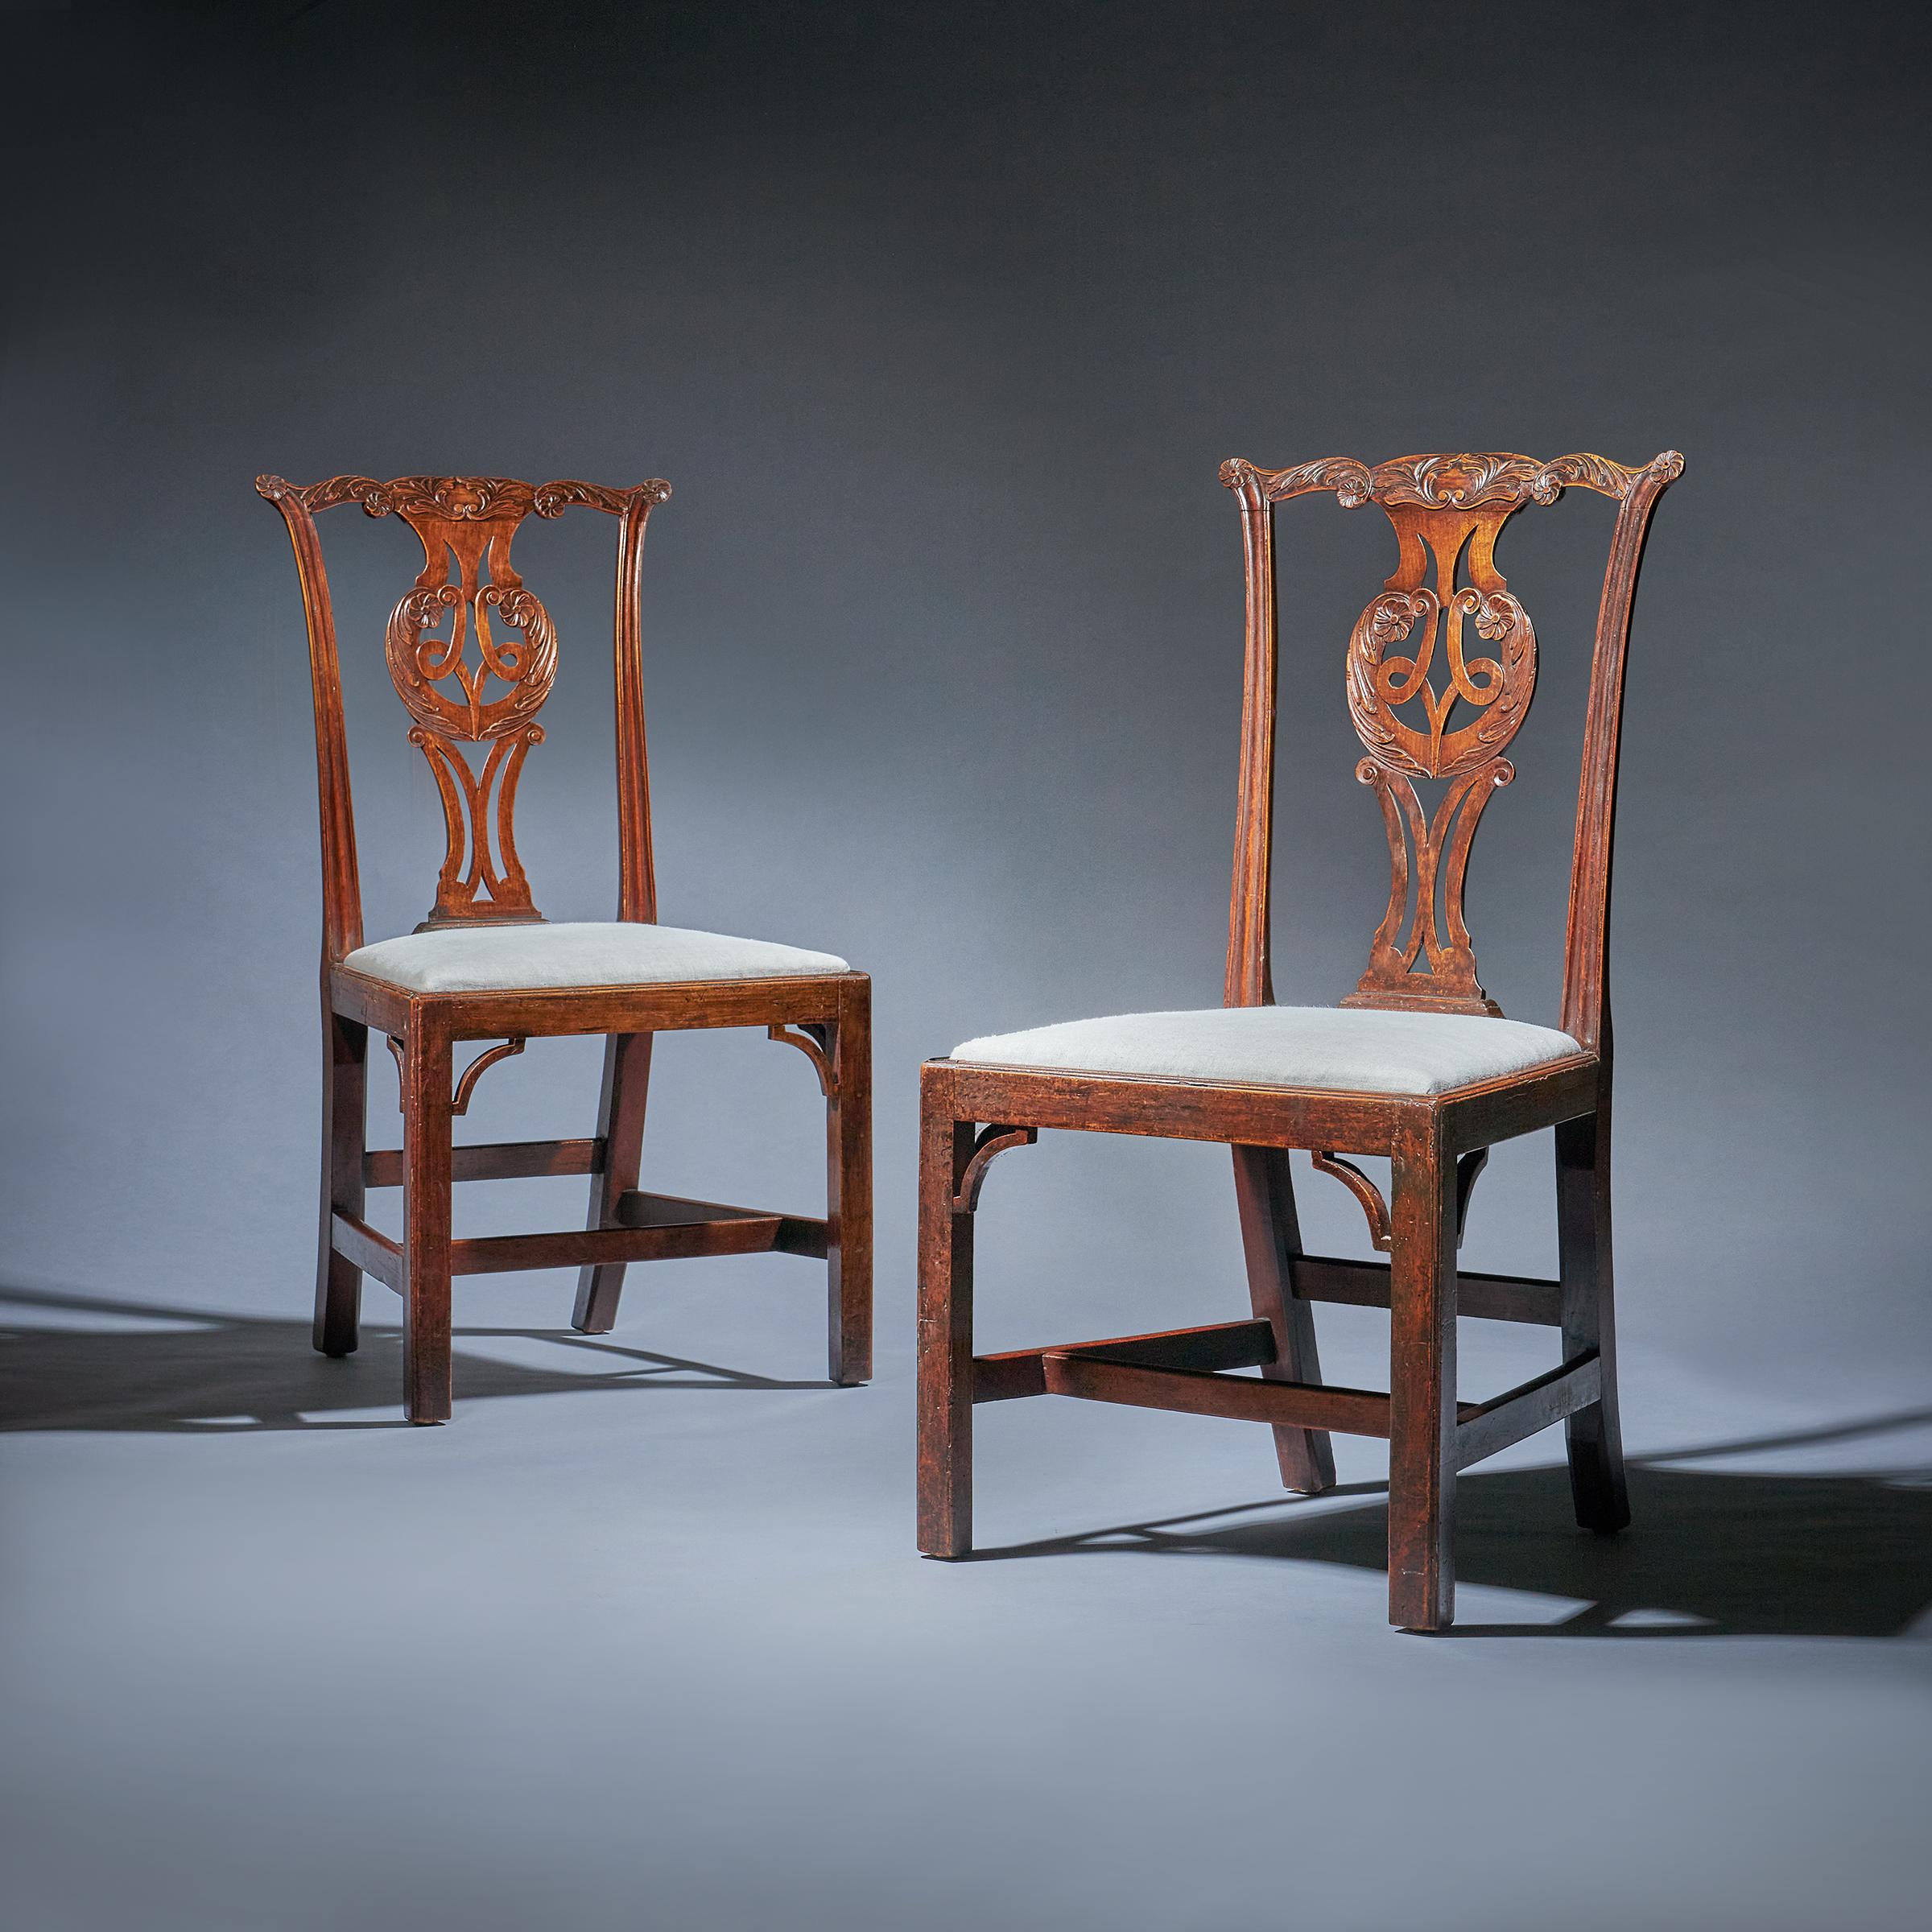 Unusual Pair of 18th Century George III Cherry Chairs, Chippendale Period 1